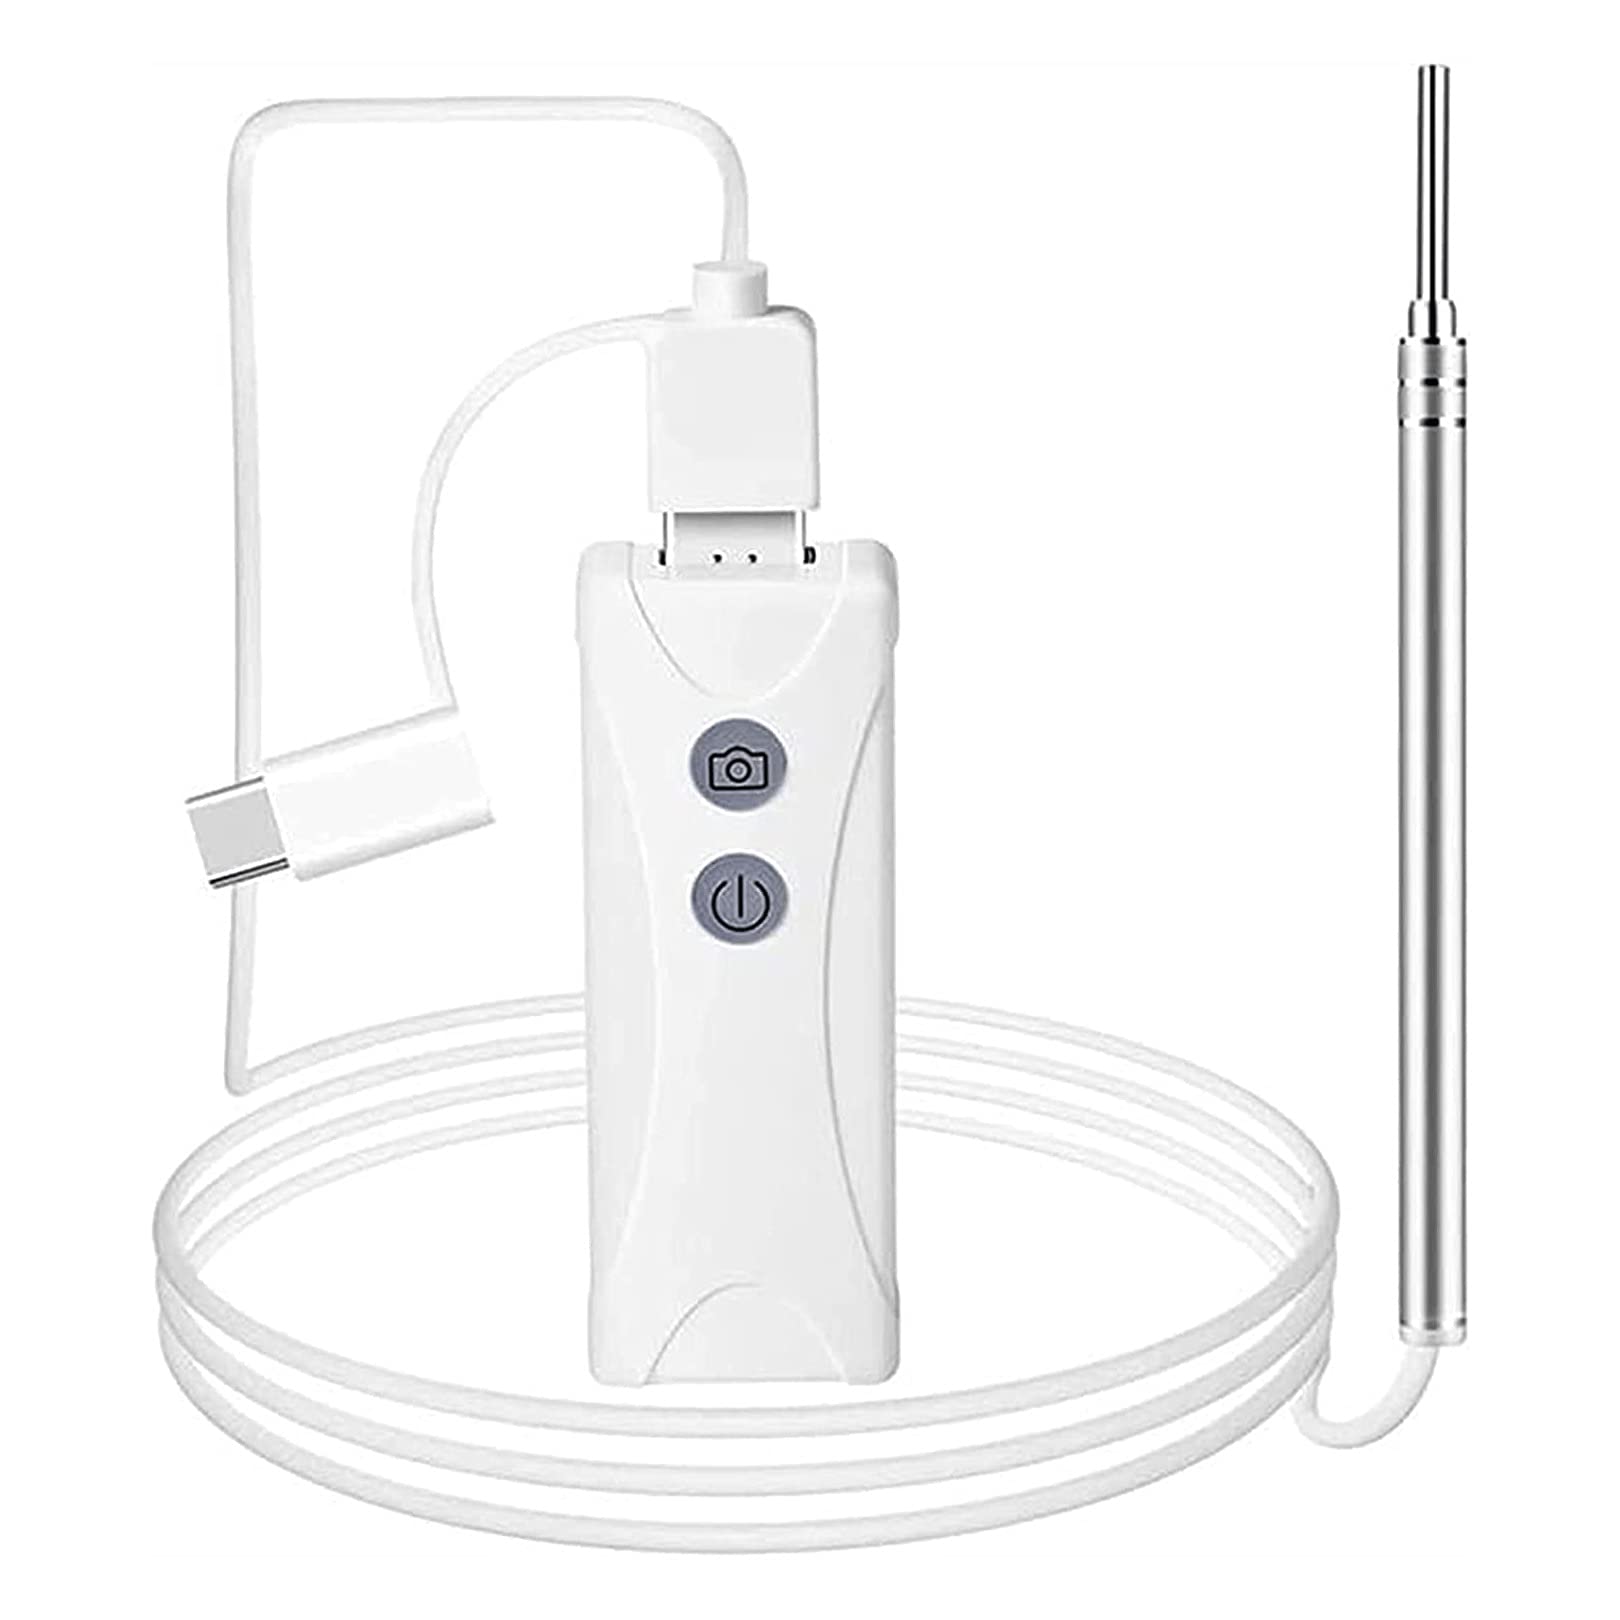 Earwax Removal Tool / USB Endoscope Inspection Camera